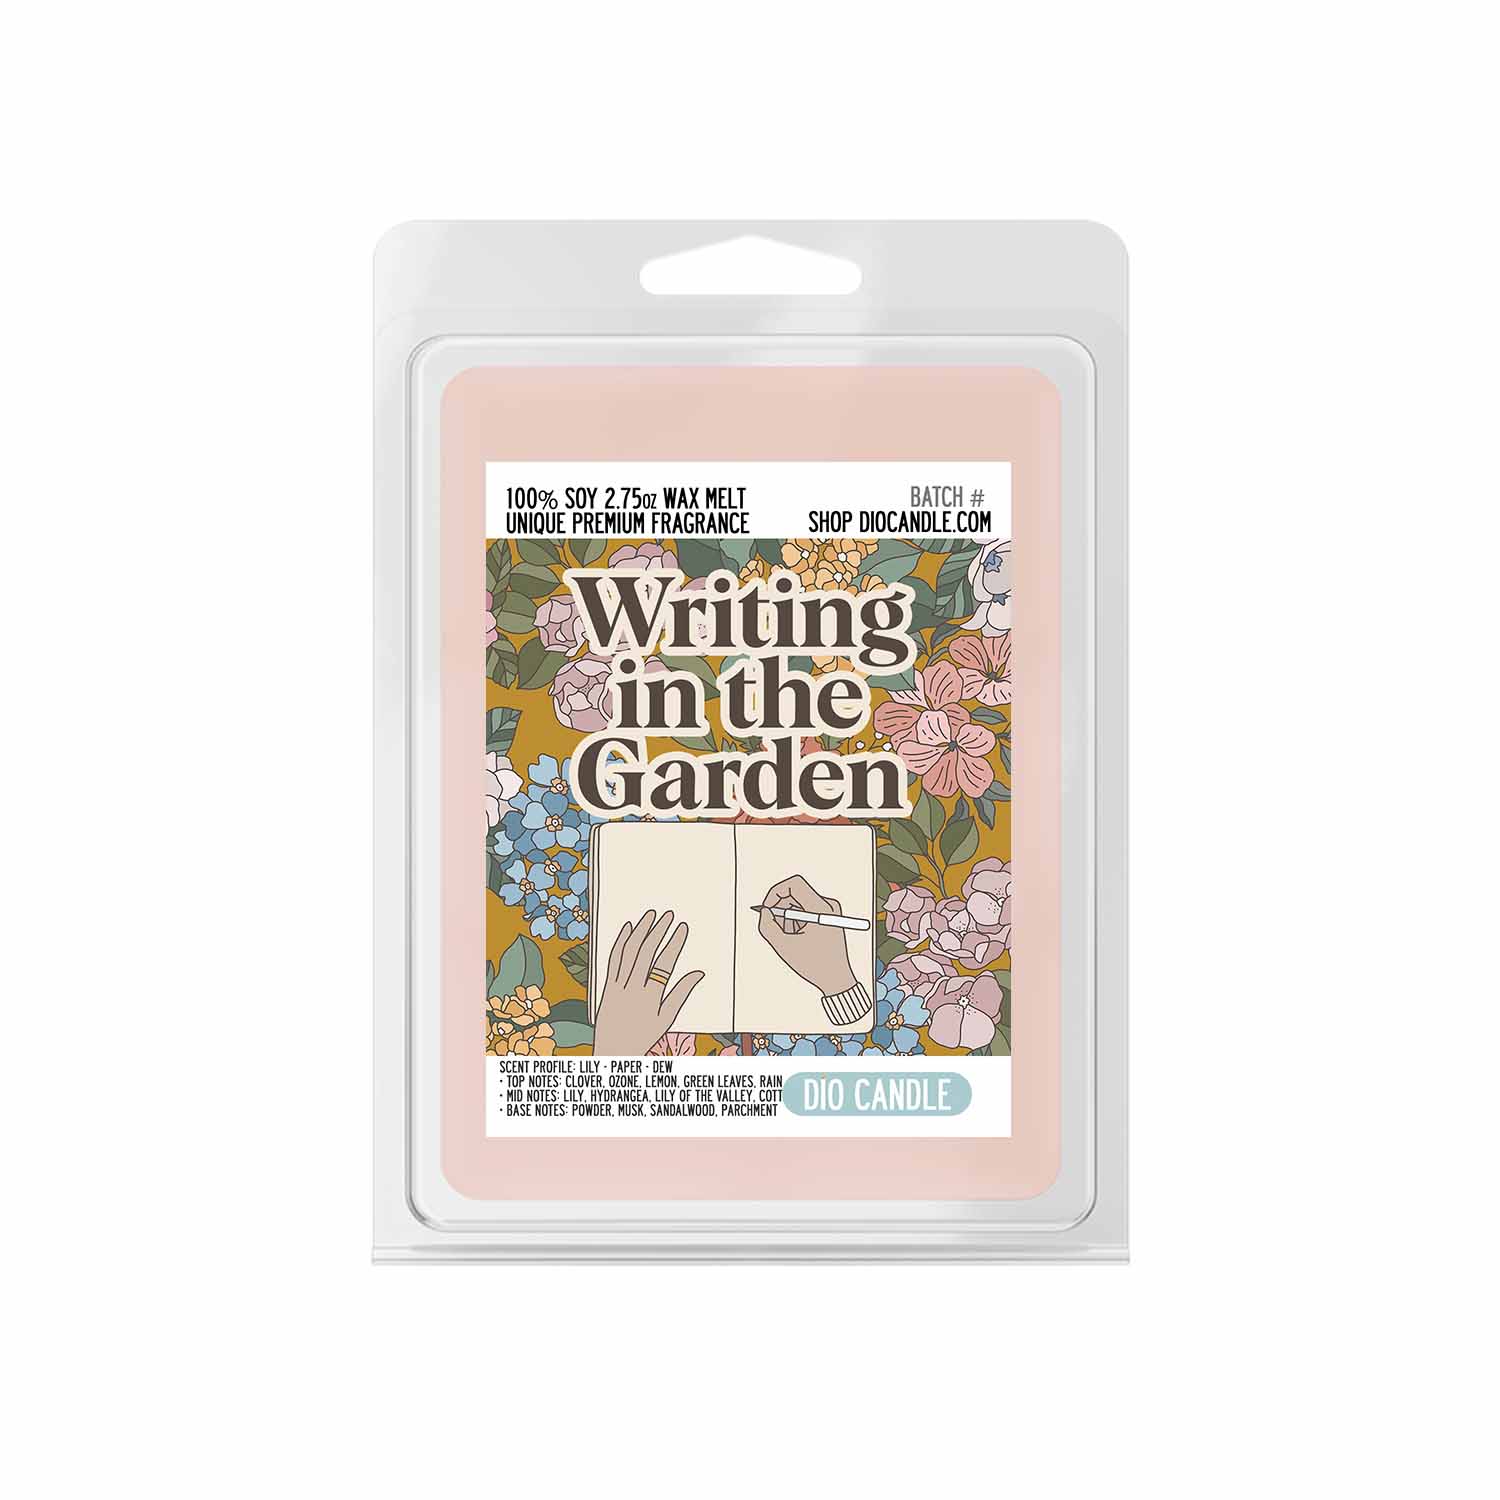 Writing in the Garden Candle